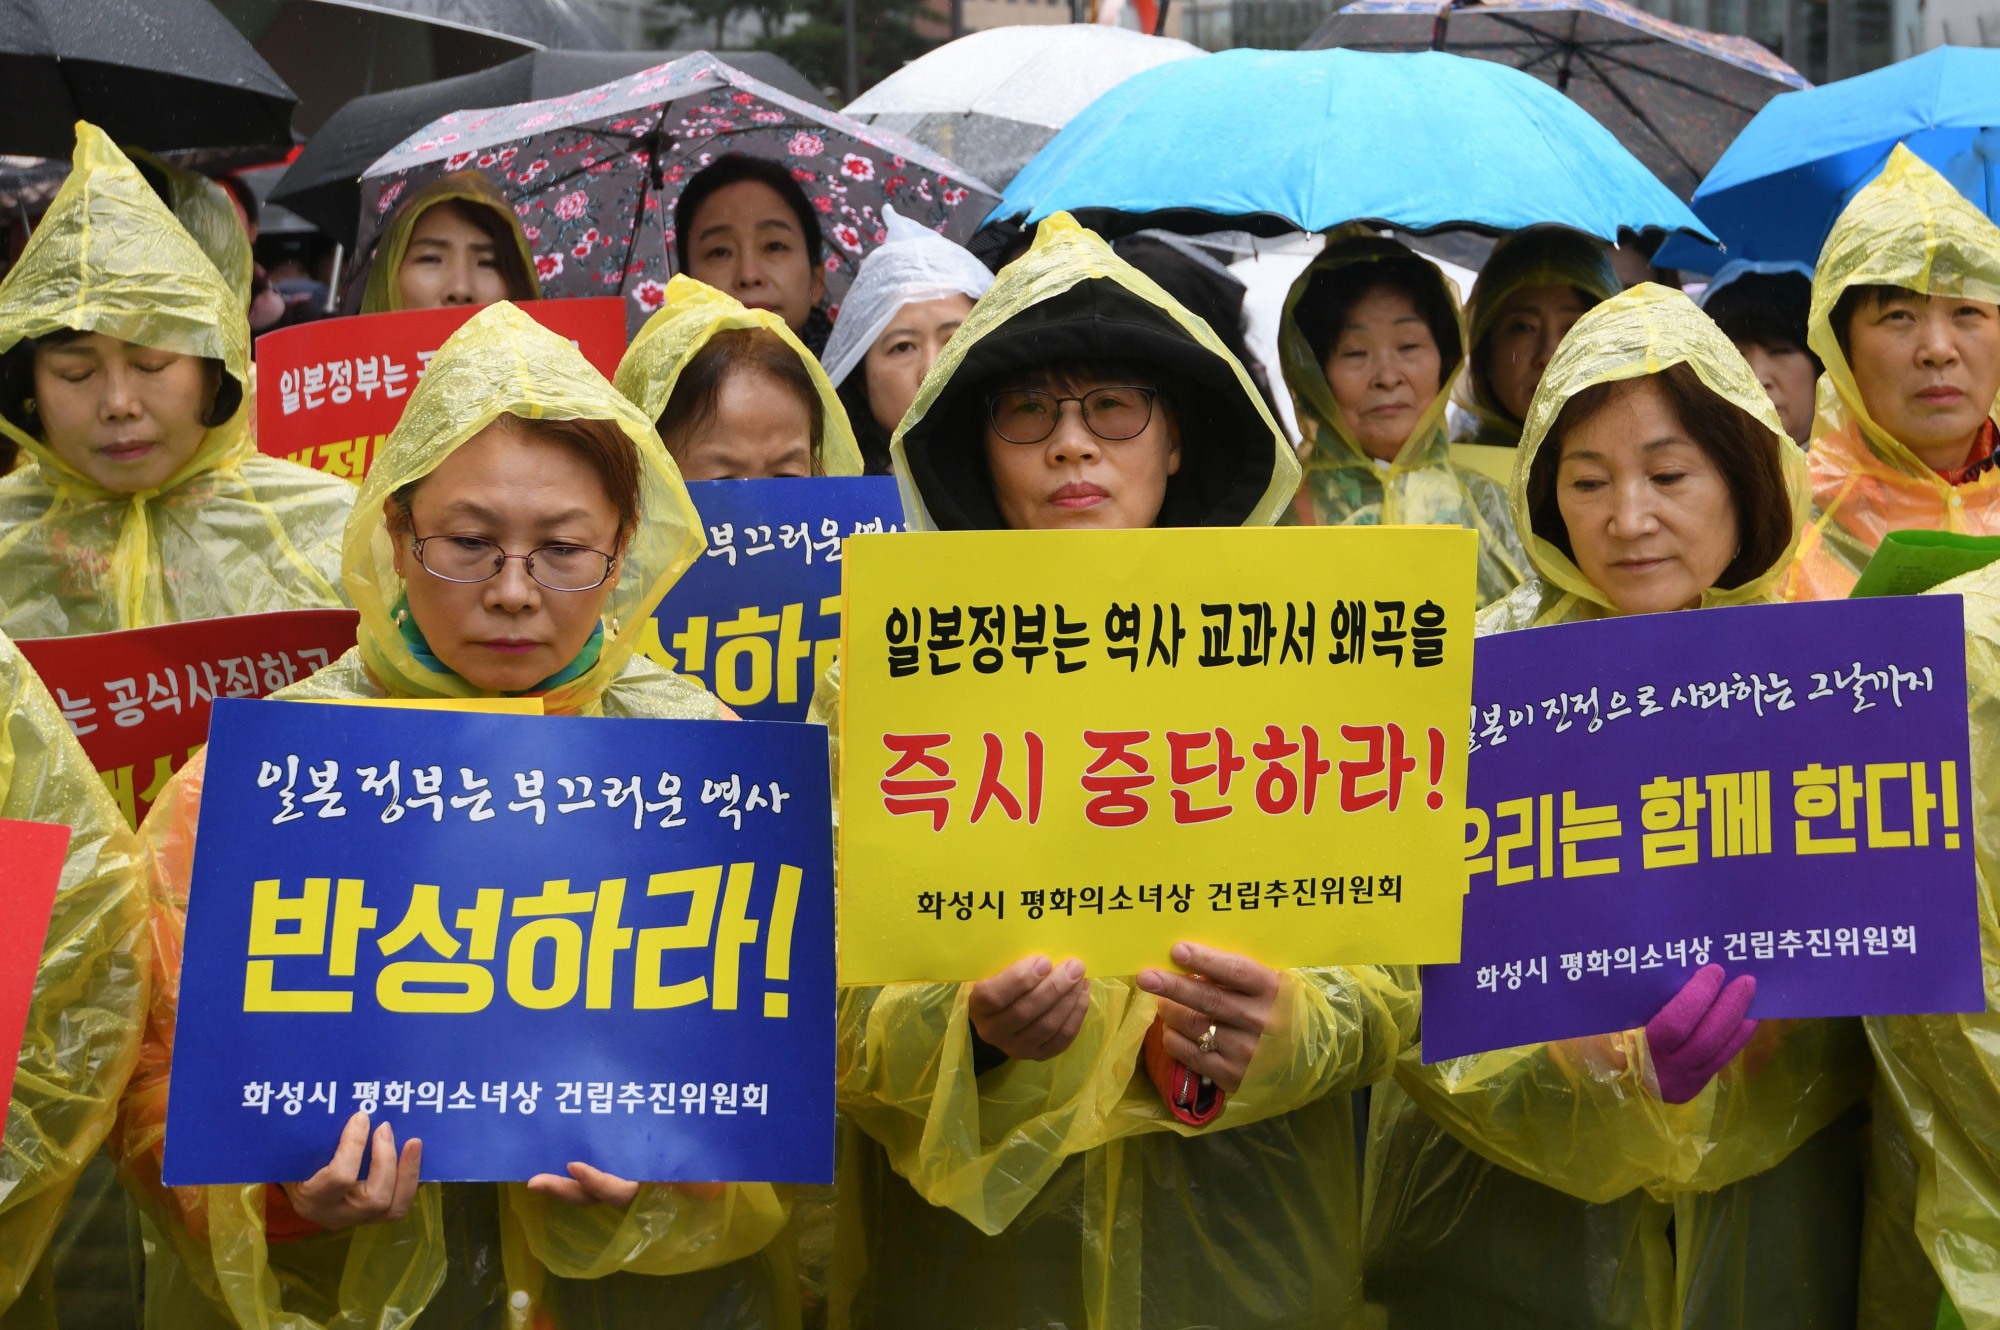 South Korean protesters take part in a weekly anti-Japanese demonstration supporting 'comfort women' near the Japanese Embassy in Seoul on April 10. Bilateral relations have grown increasingly chilly in recent months. | AFP-JIJI